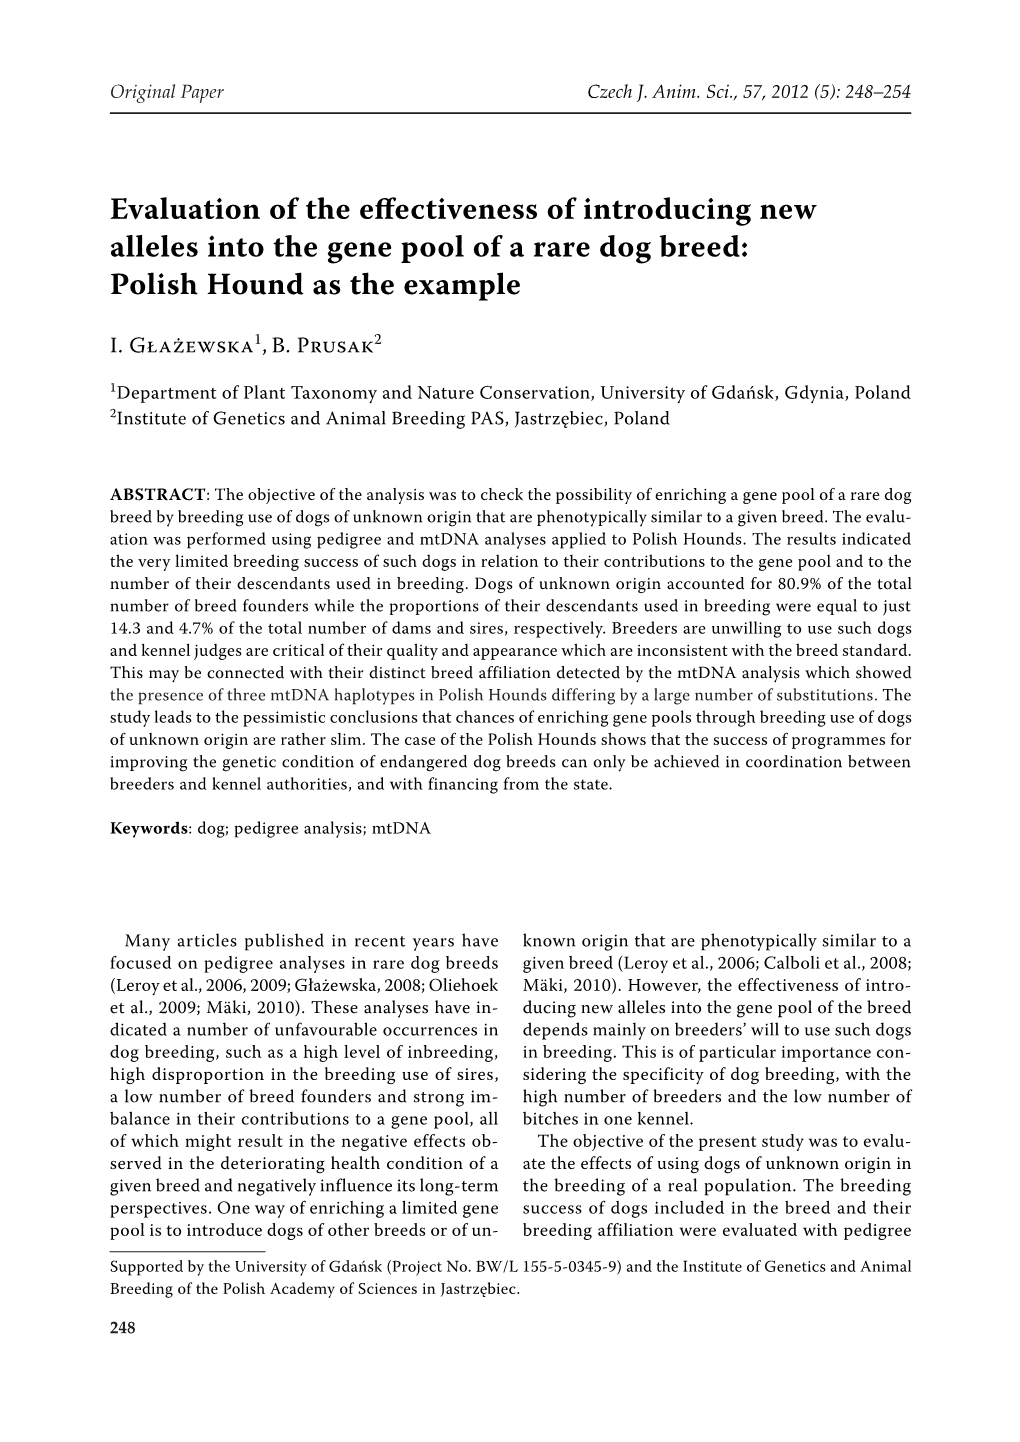 Evaluation of the Effectiveness of Introducing New Alleles Into the Gene Pool of a Rare Dog Breed: Polish Hound As the Example